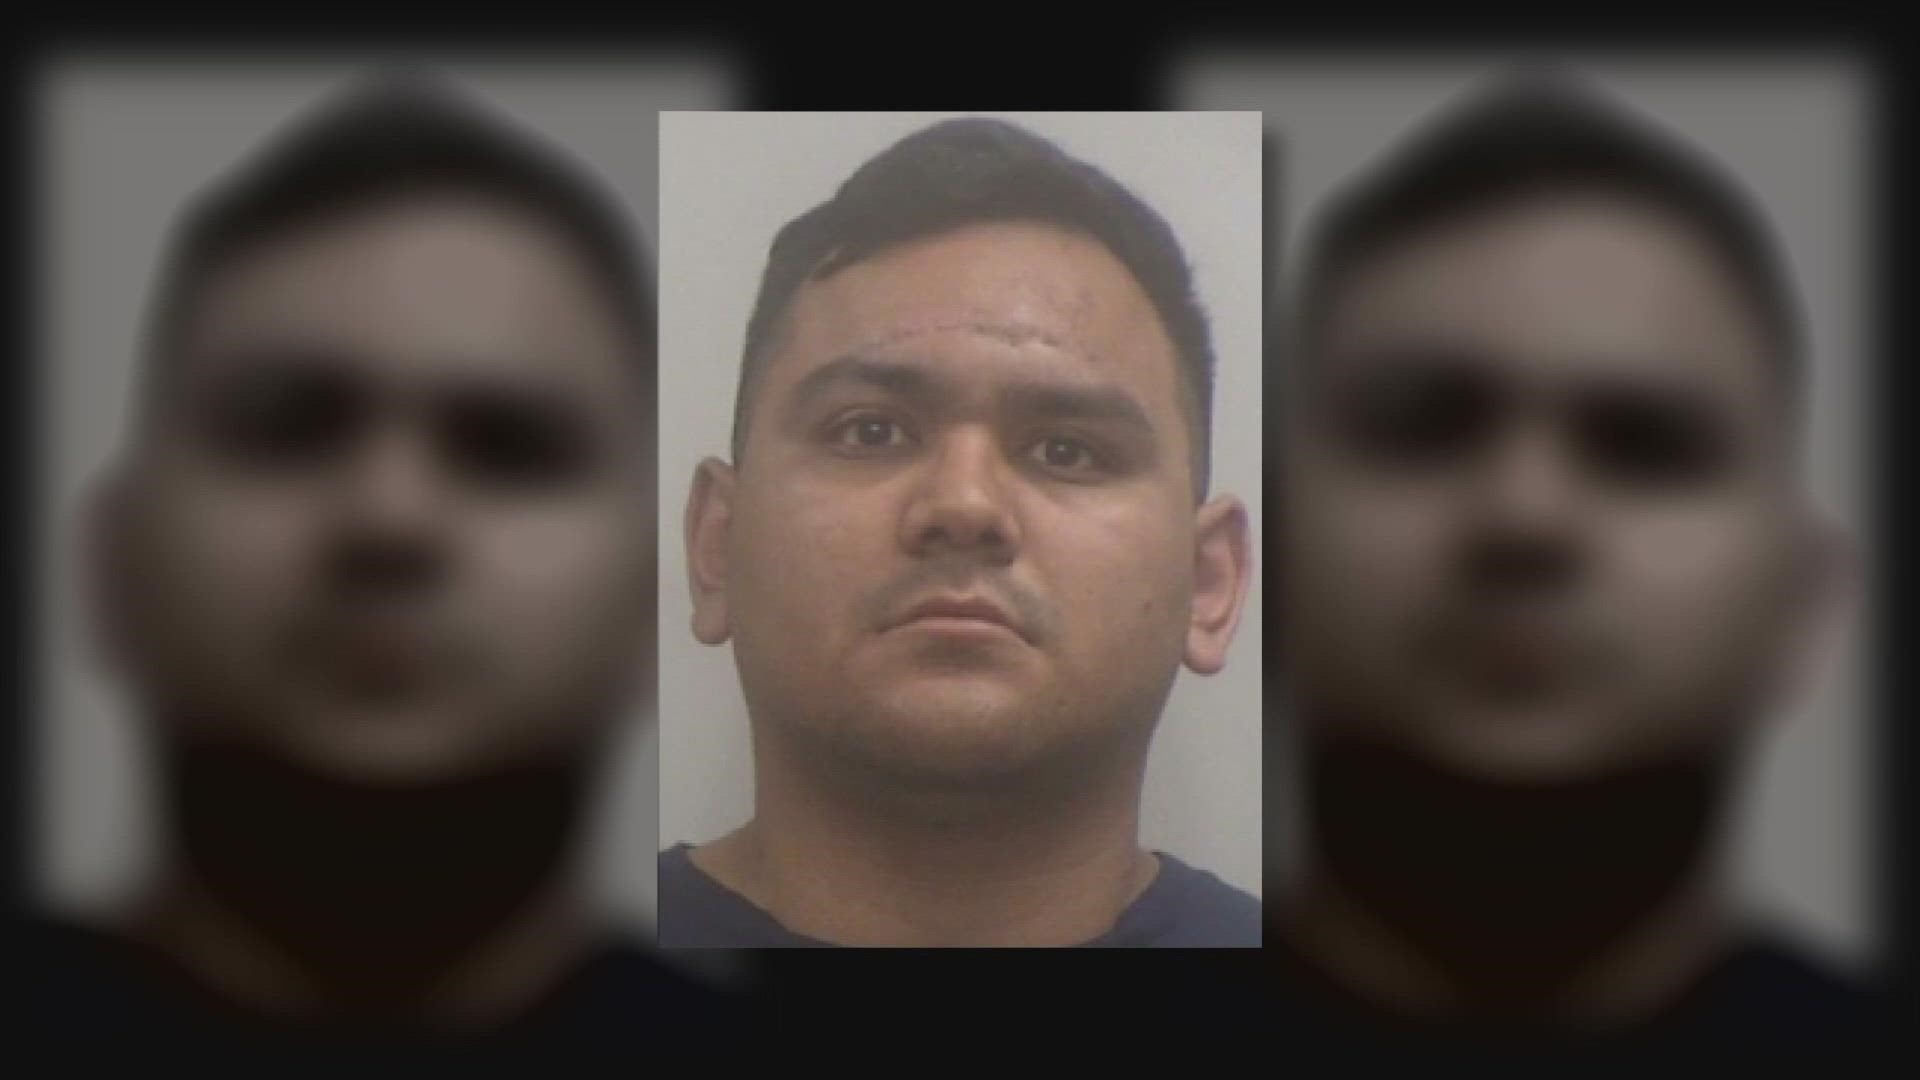 Former teacher Victor Moreno, 28, is accused of continuous sex abuse of a young child and has been released from jail on bond, police said.